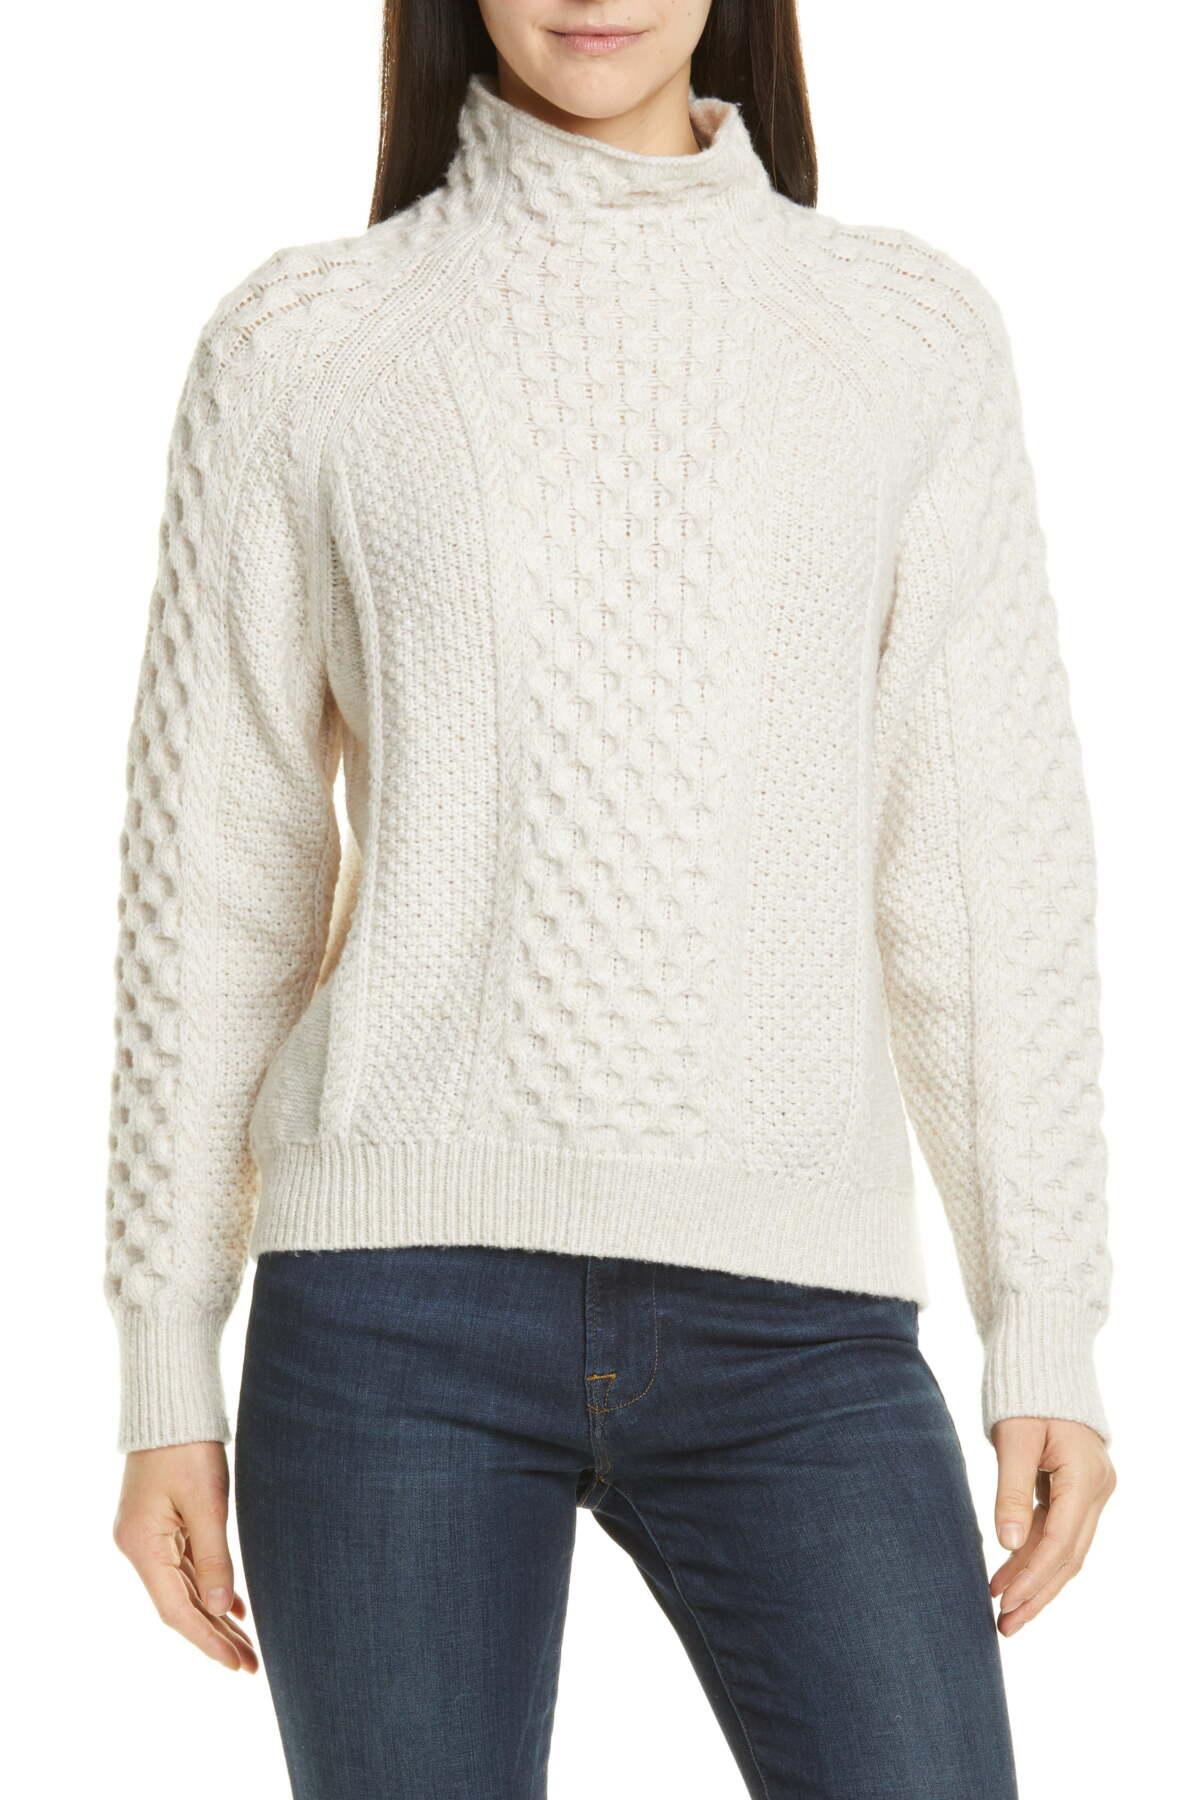 Vince Mixed Cable Wool & Cashmere Blend Sweater in White - Save 60% - Lyst